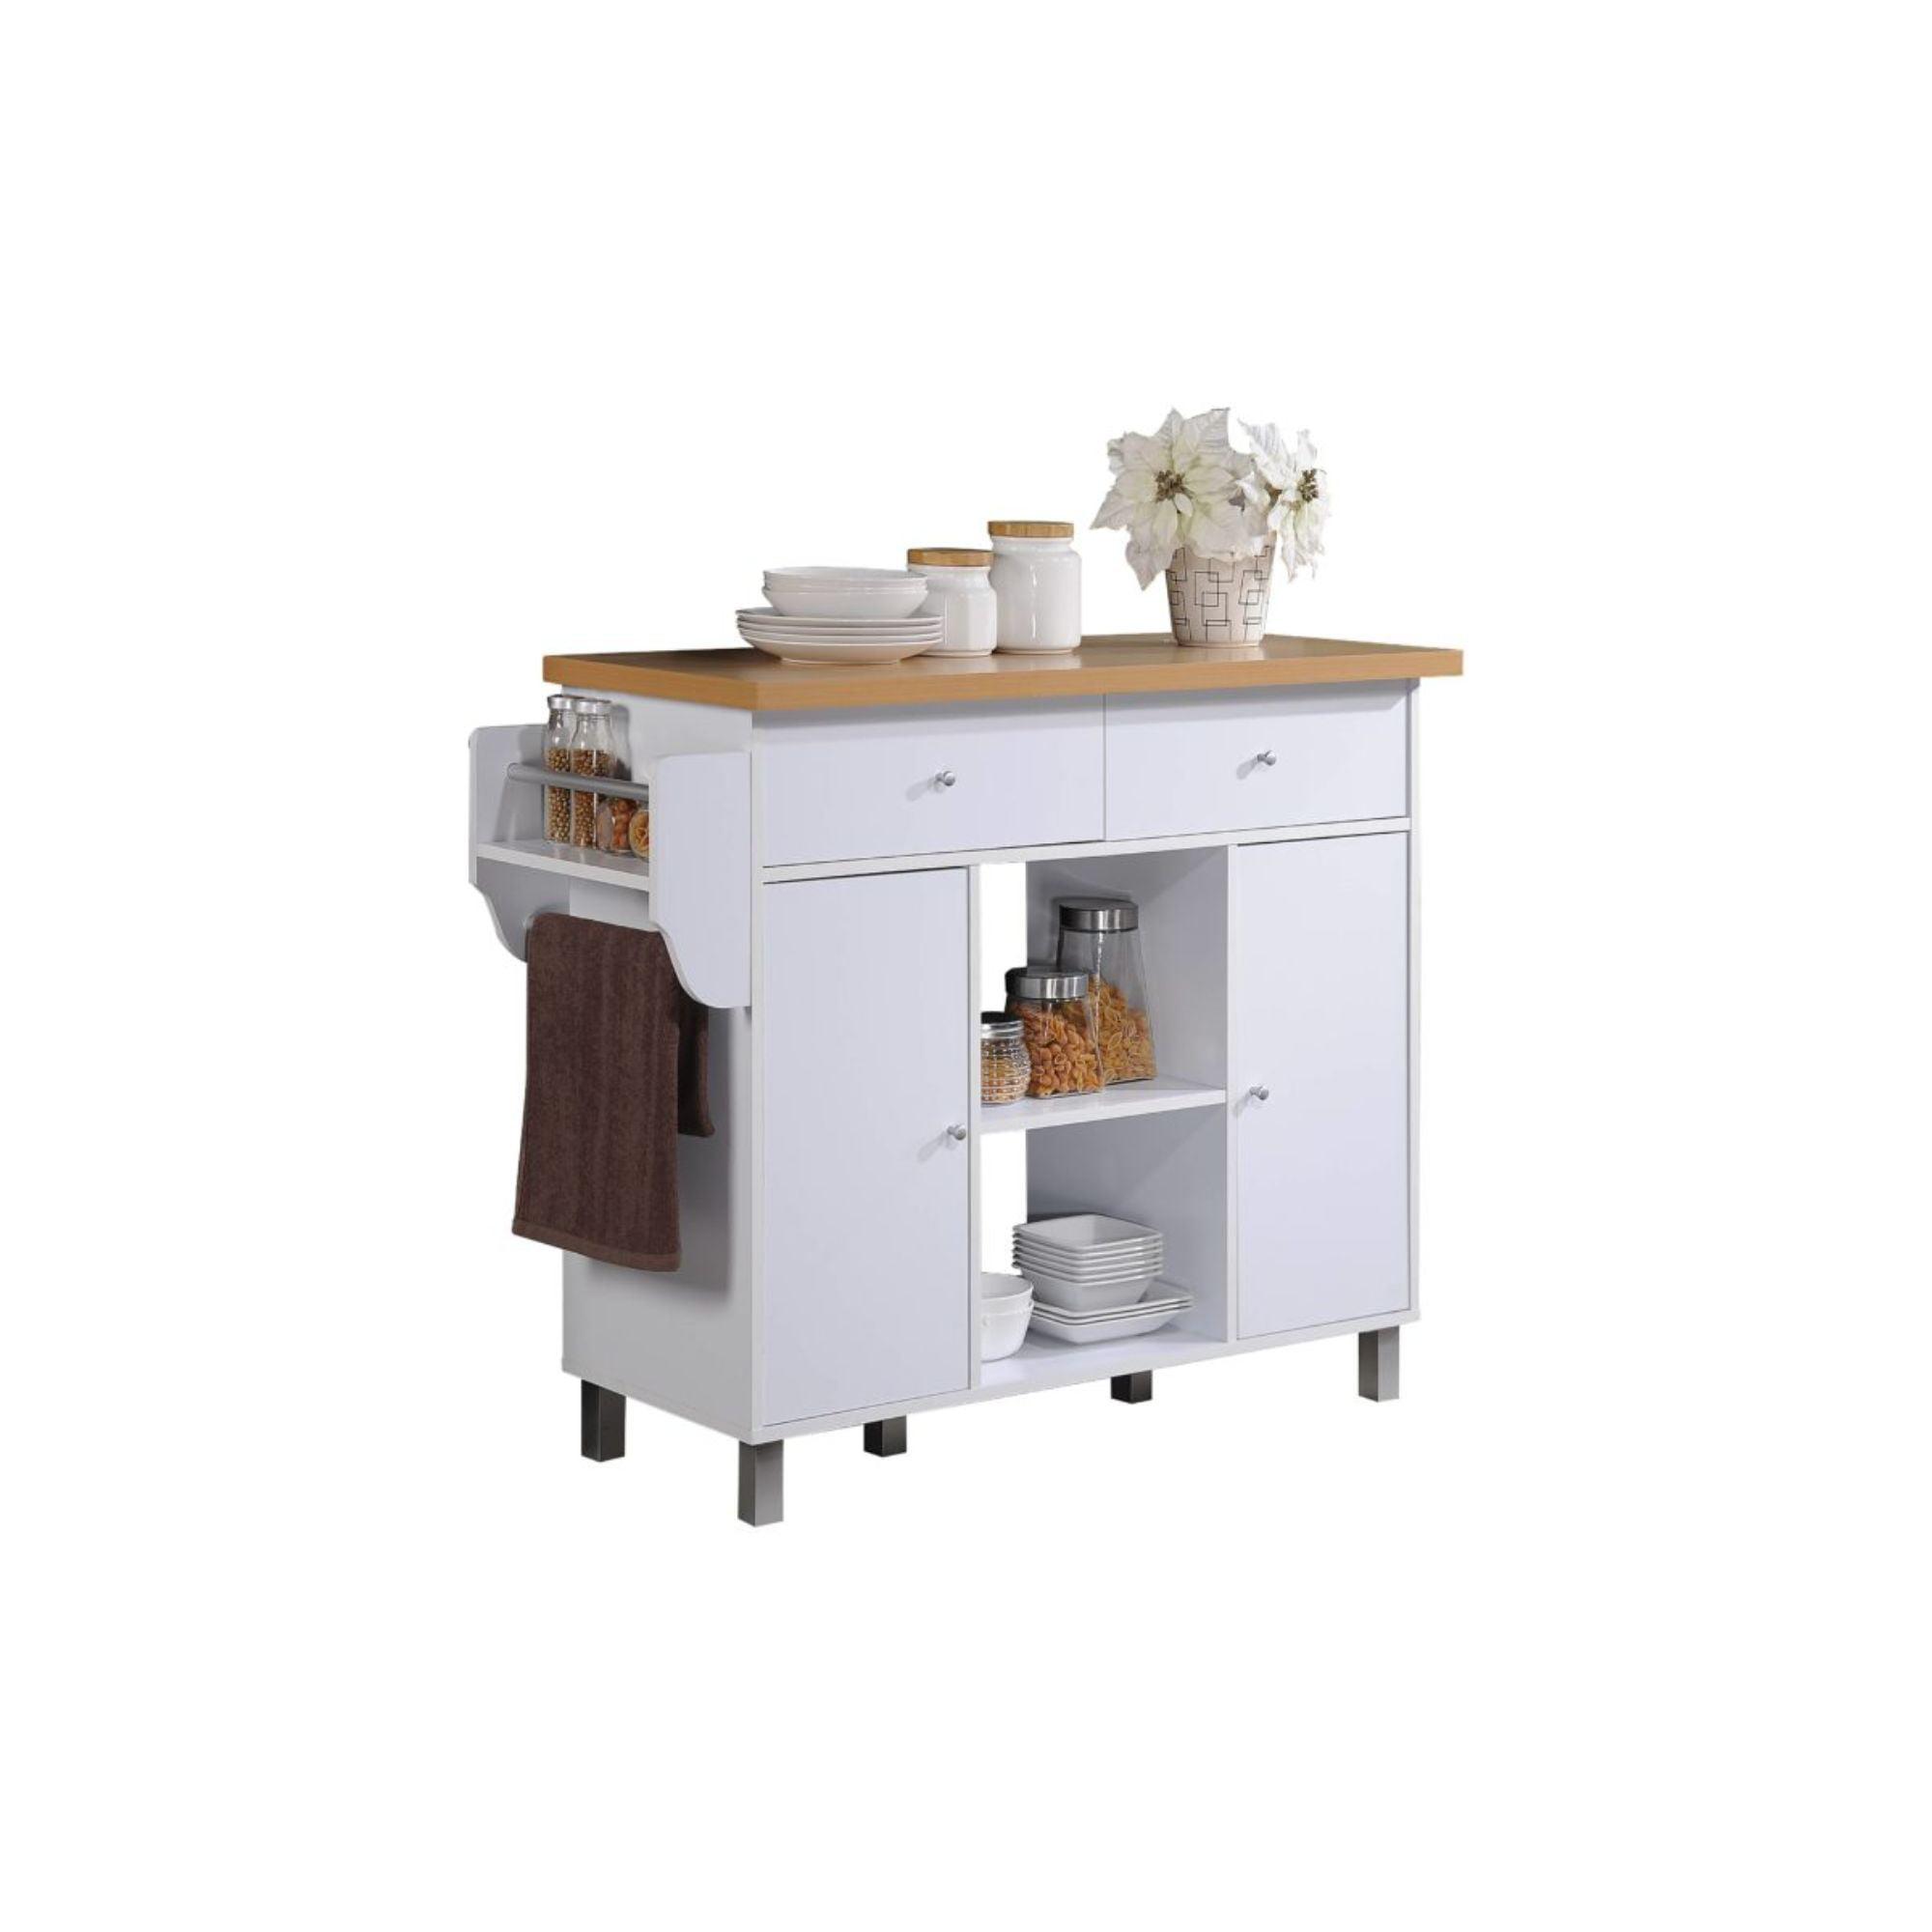 Elegant White Compressed Wood Kitchen Island with Spice and Towel Rack